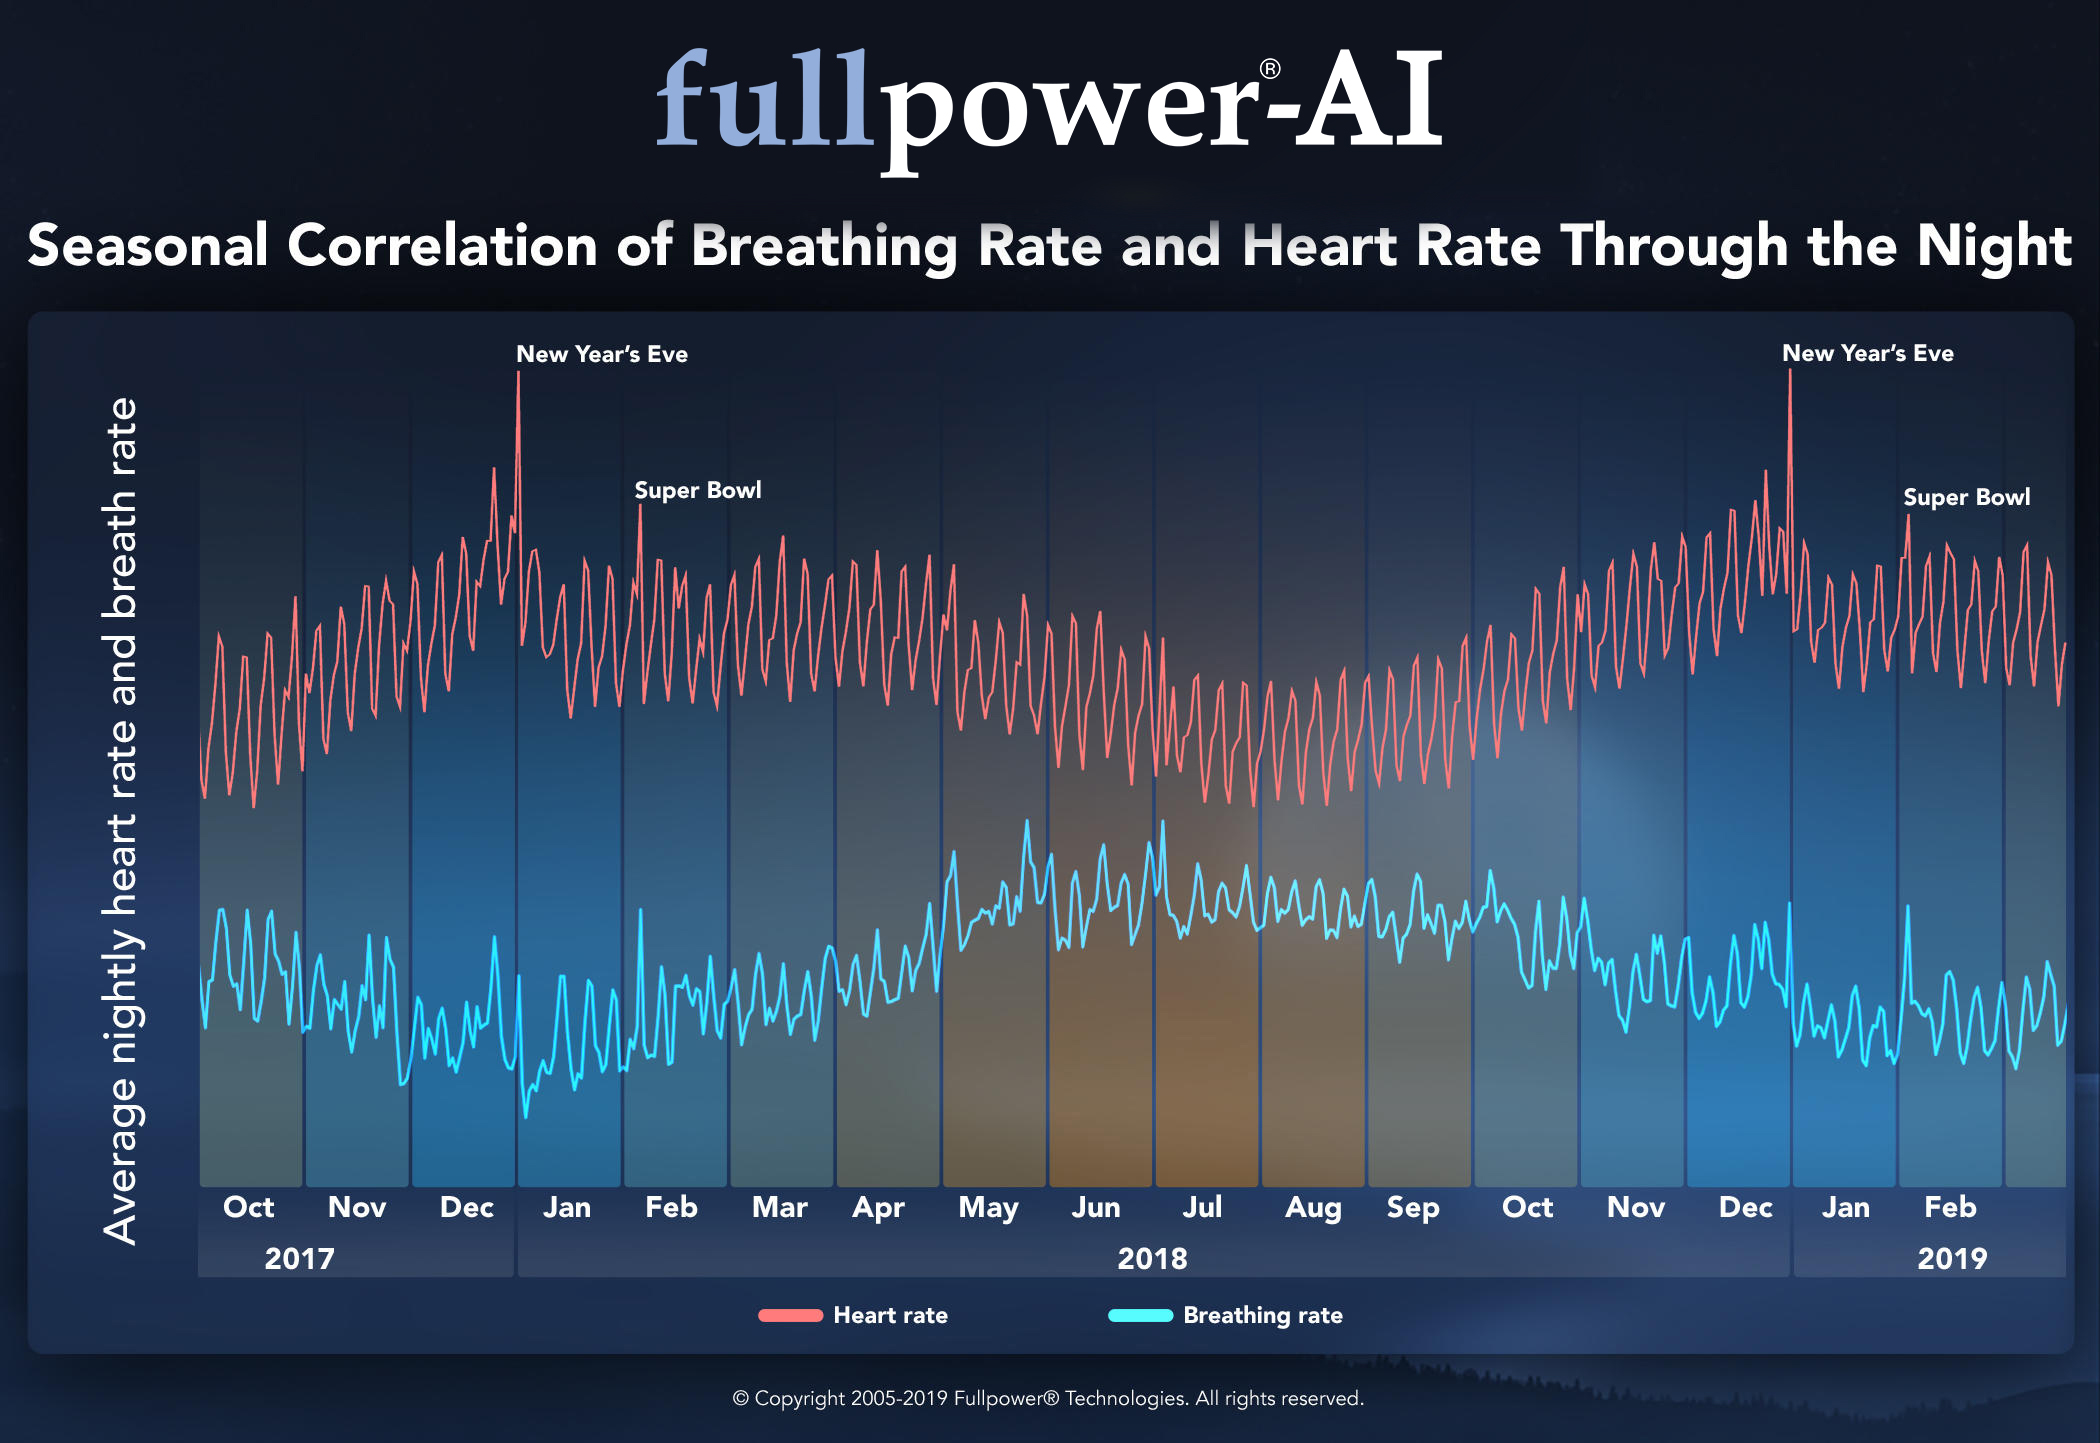 Seasonal Correlation of Breathing Rate and Heart Rate Through the Night